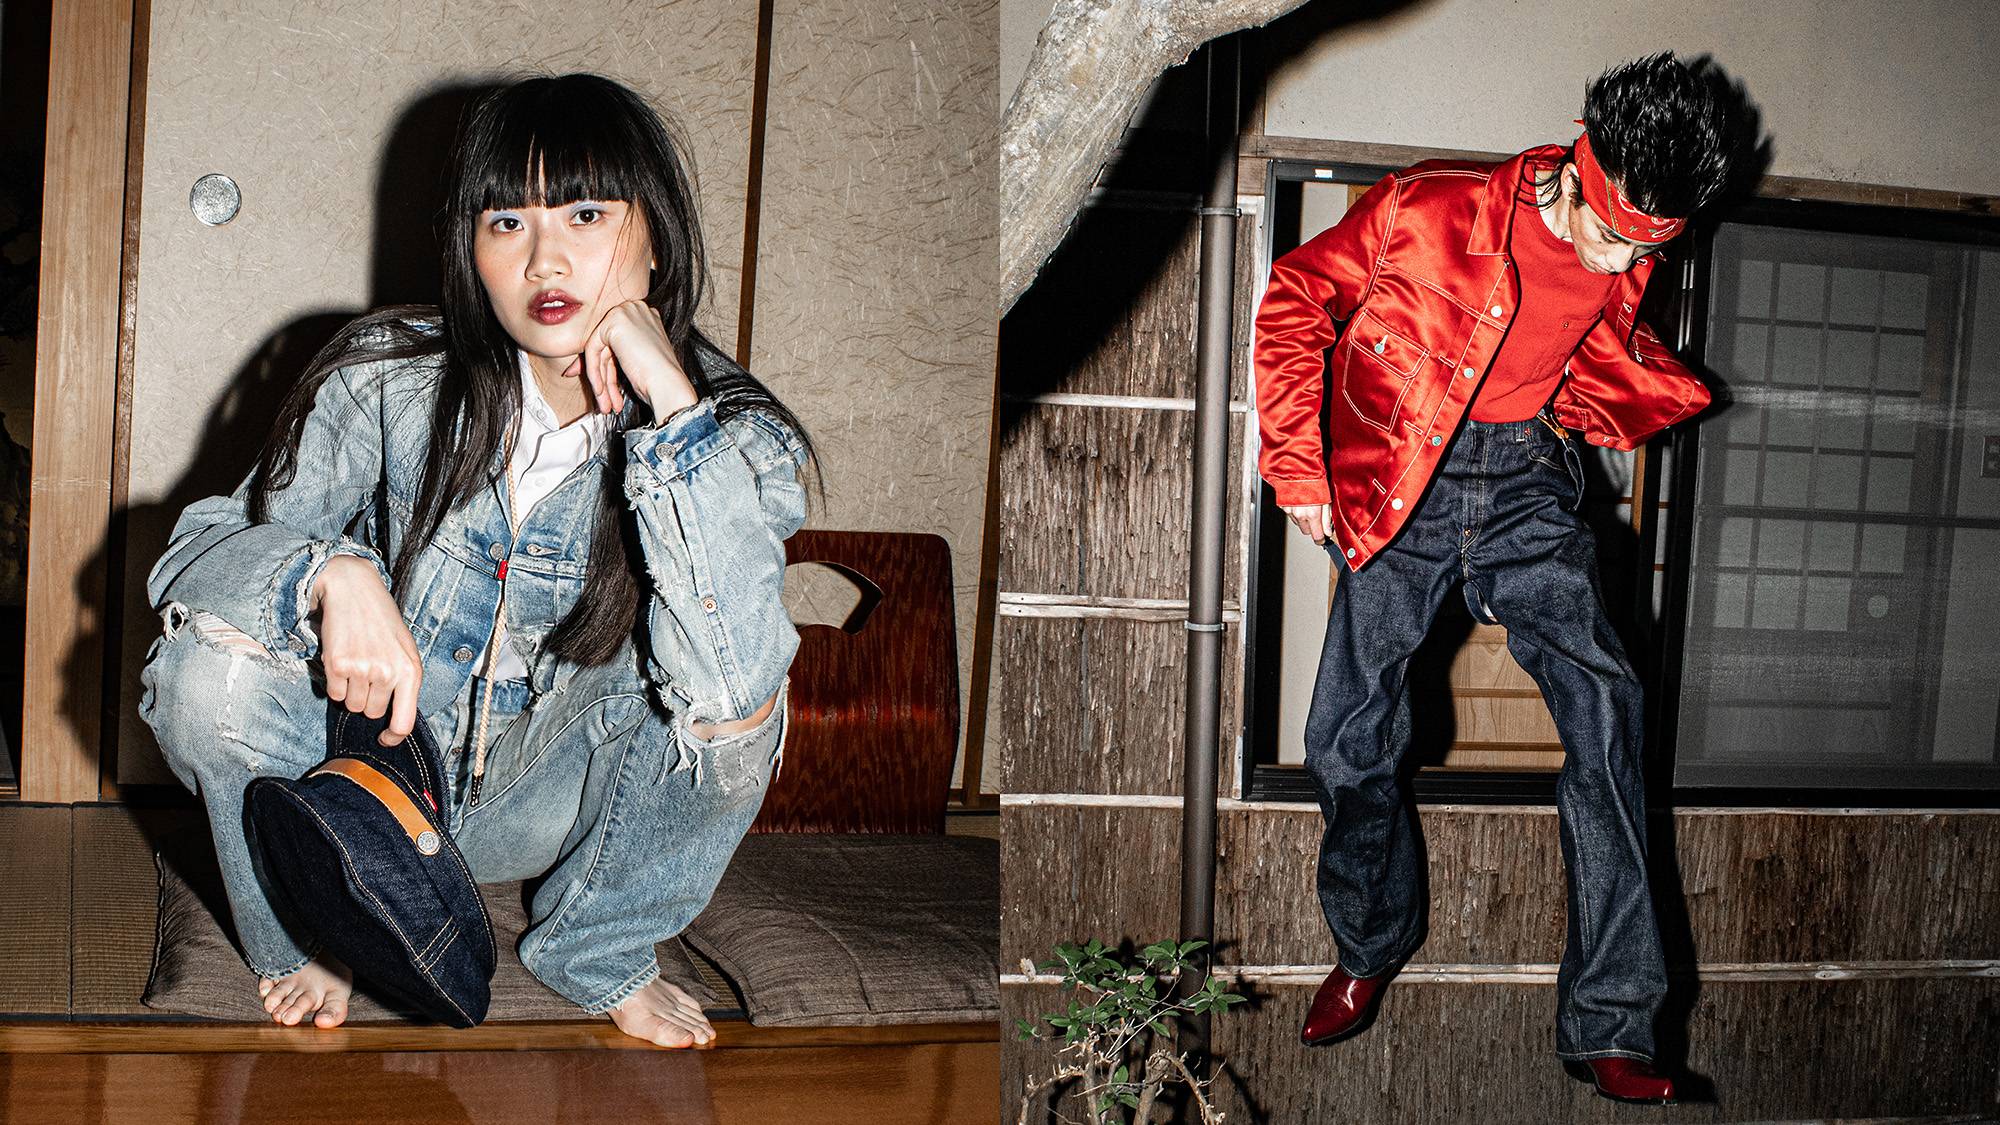 For @kenzo's latest collaboration with @levis, Japanese streetwear